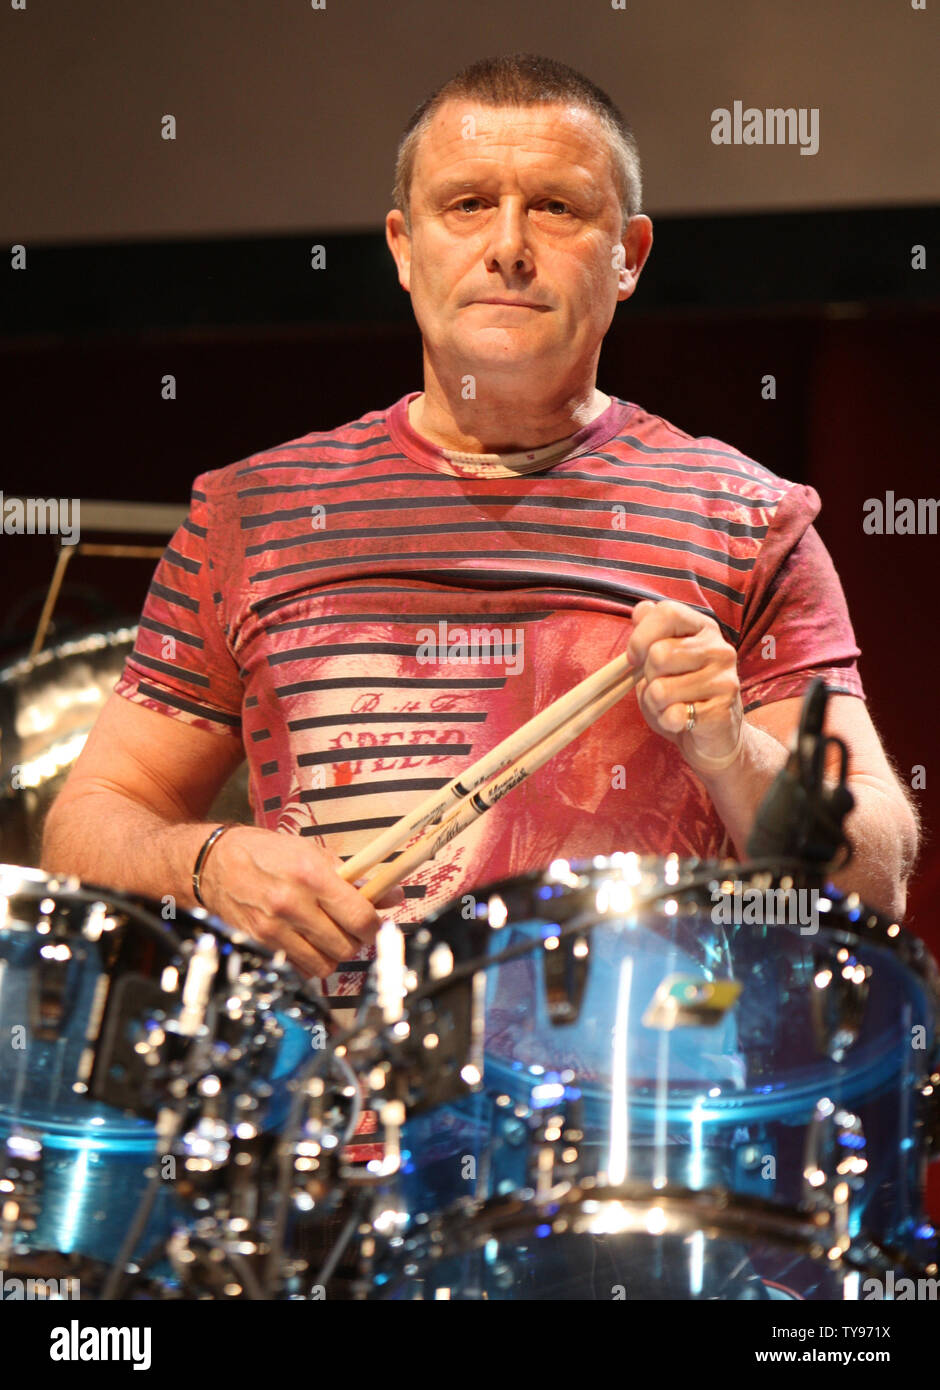 Drummer Carl Palmer of Asia performs at the House of Blues in Las Vegas on March 29, 2008. The progressive rock band is touring in support of their comeback album "Phoenix". (UPI Photo/Daniel Gluskoter) Stock Photo